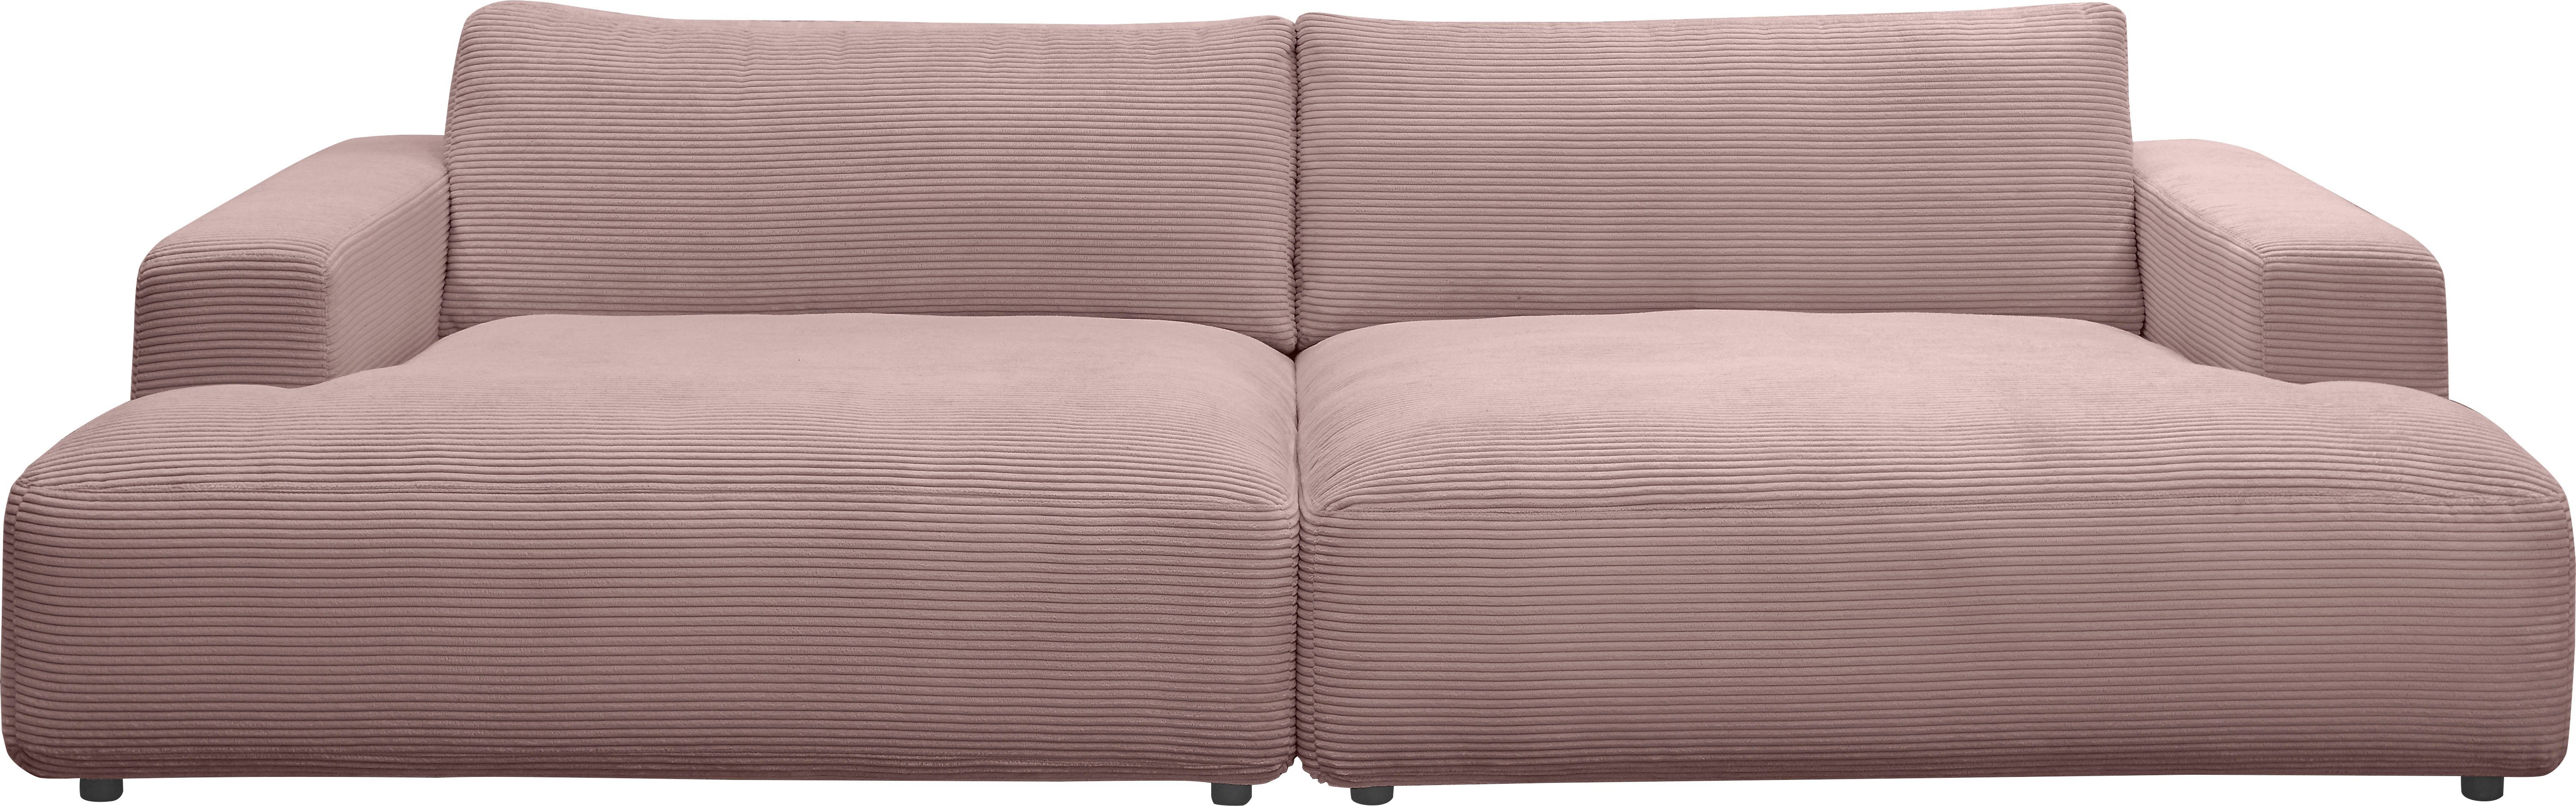 by GALLERY Cord-Bezug, M branded Breite rosa cm Musterring Lucia, Loungesofa 292